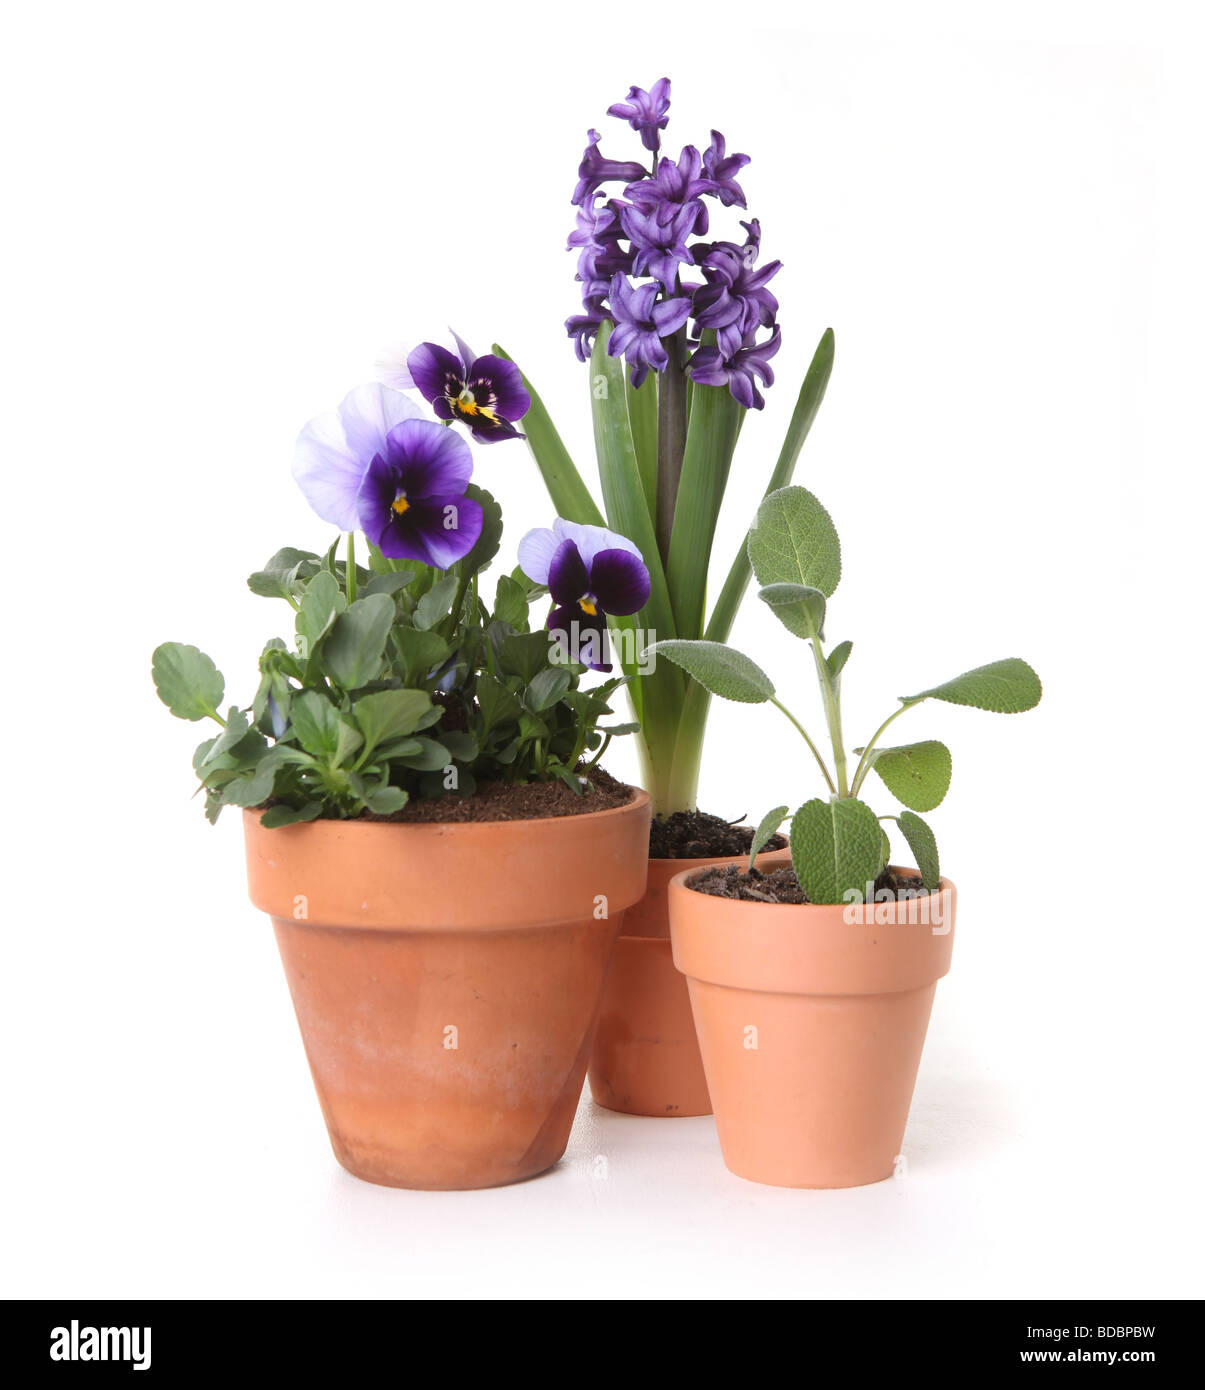 Colorful Spring Flowers of Pansies and Hyacinth in Pots on White Background Stock Photo